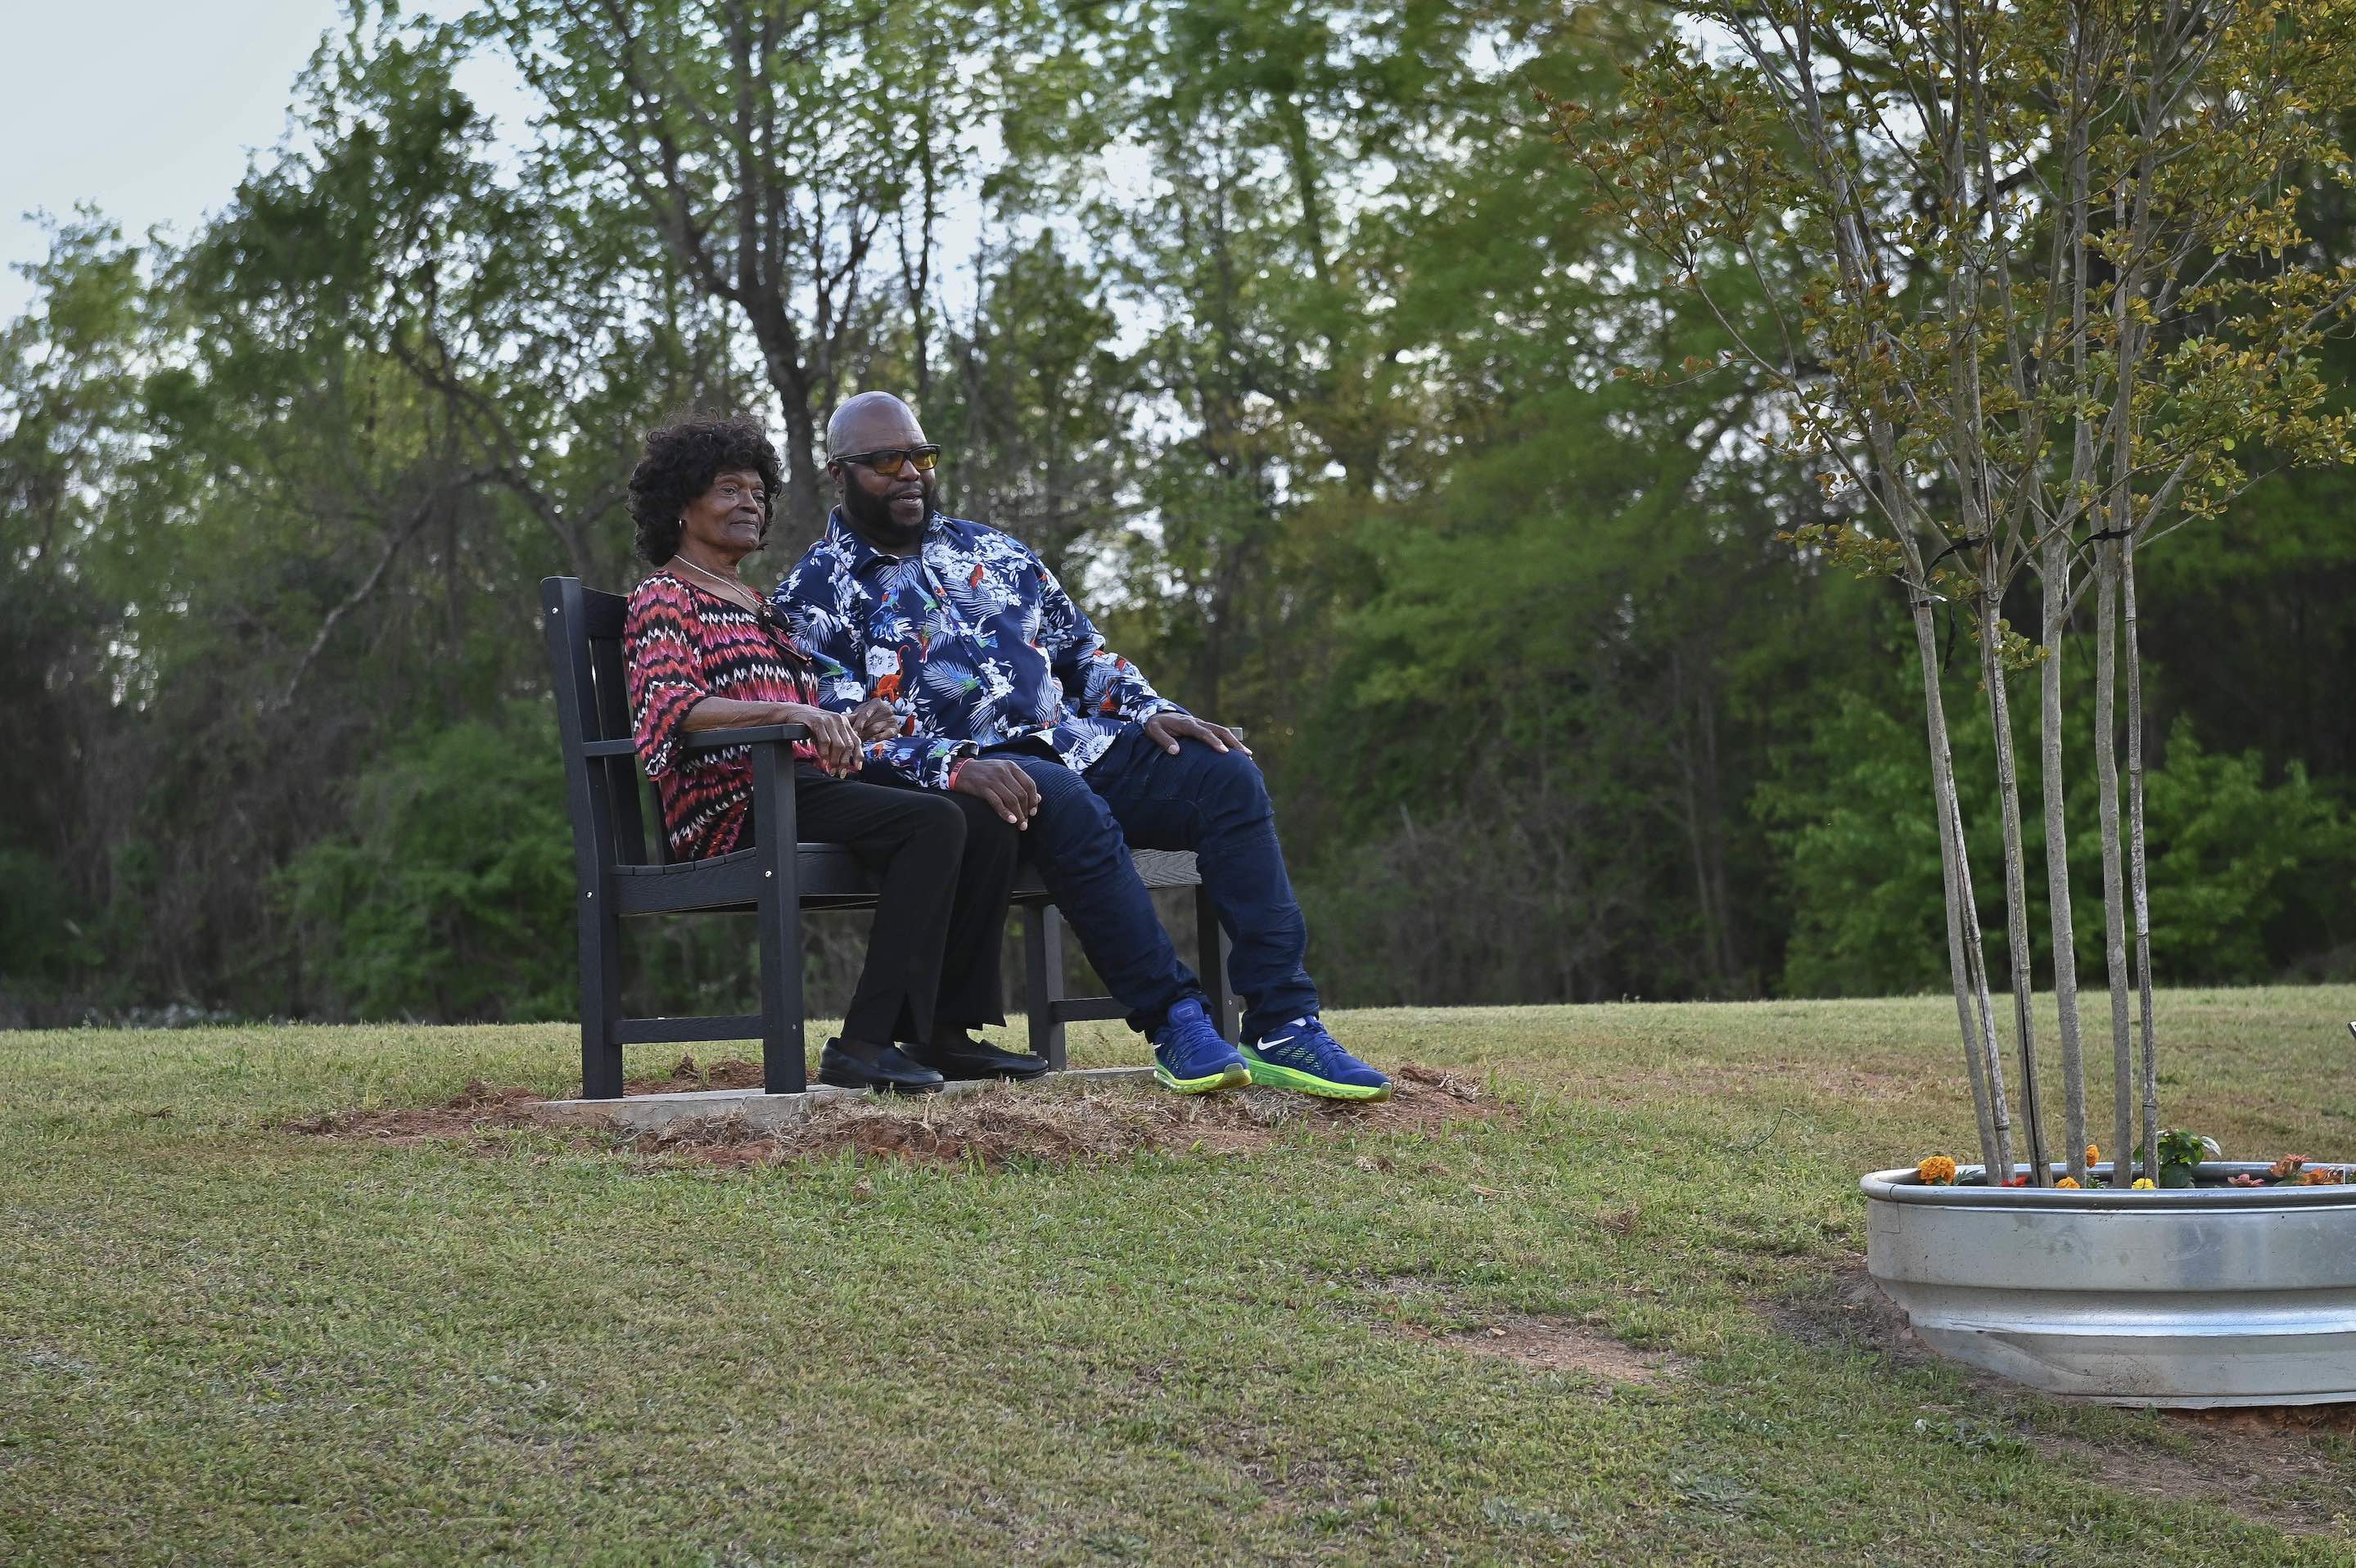 Gladys, wife of the late Deacon Joseph Ward Sr., sit with her son on a memorial bench in honor of her husband at Collins P. Lee Community Center.